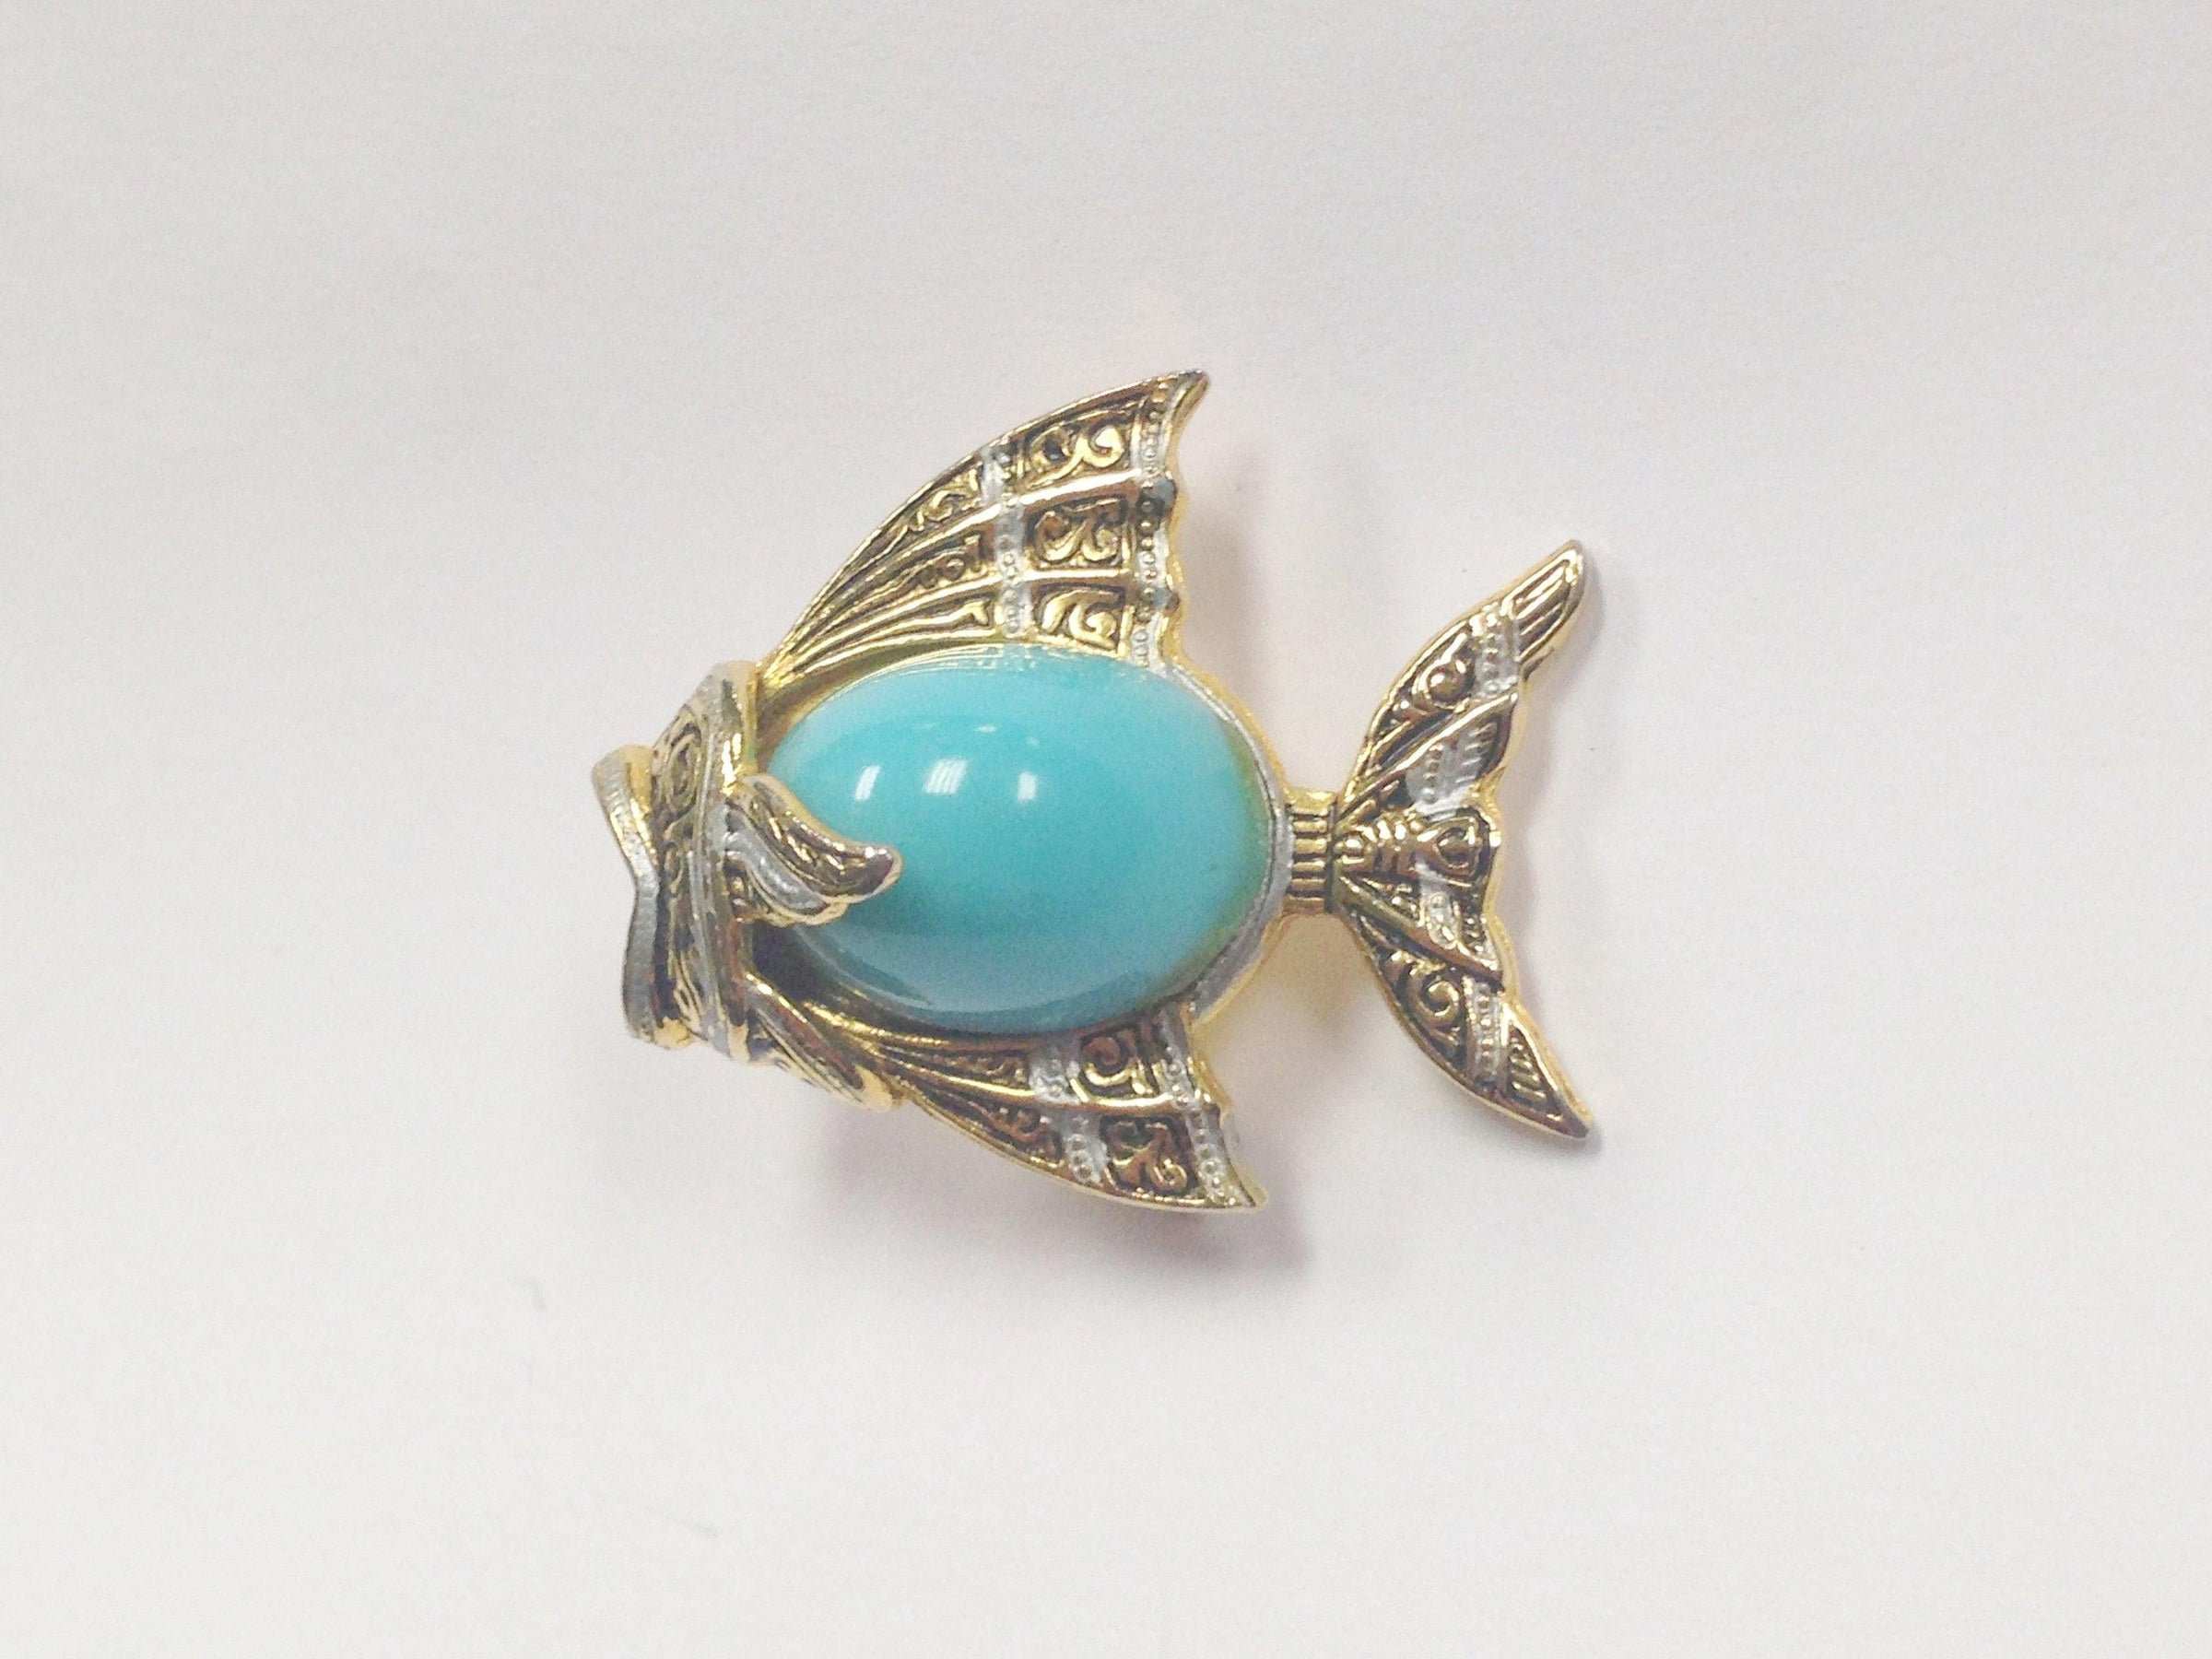 Toledoware Damascene Style Angel Fish Faux Turquoise Brooch Pin Spain - Hers and His Treasures